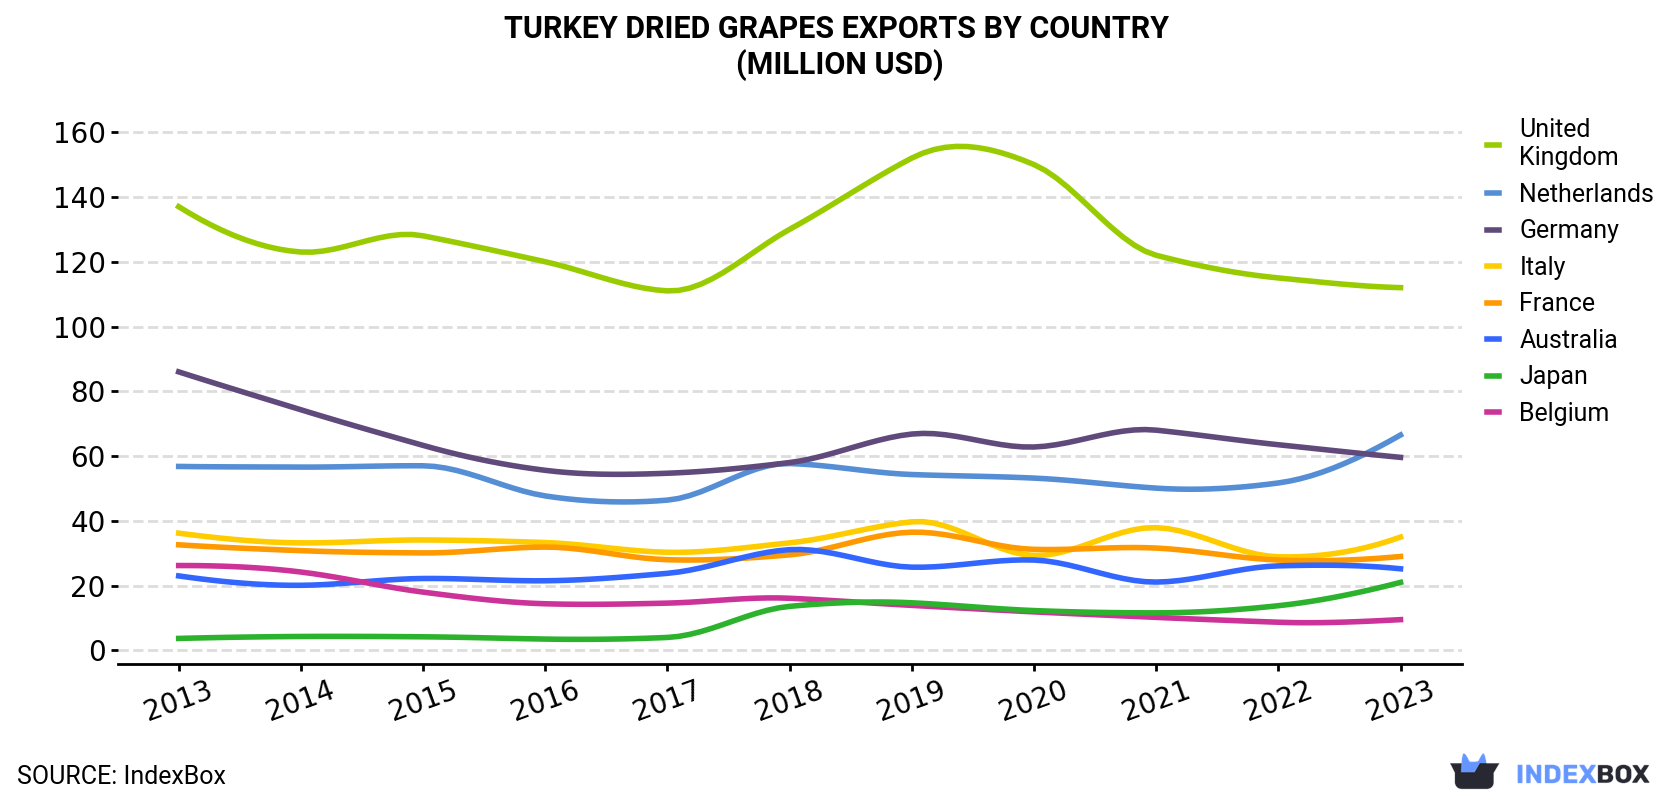 Turkey Dried Grapes Exports By Country (Million USD)